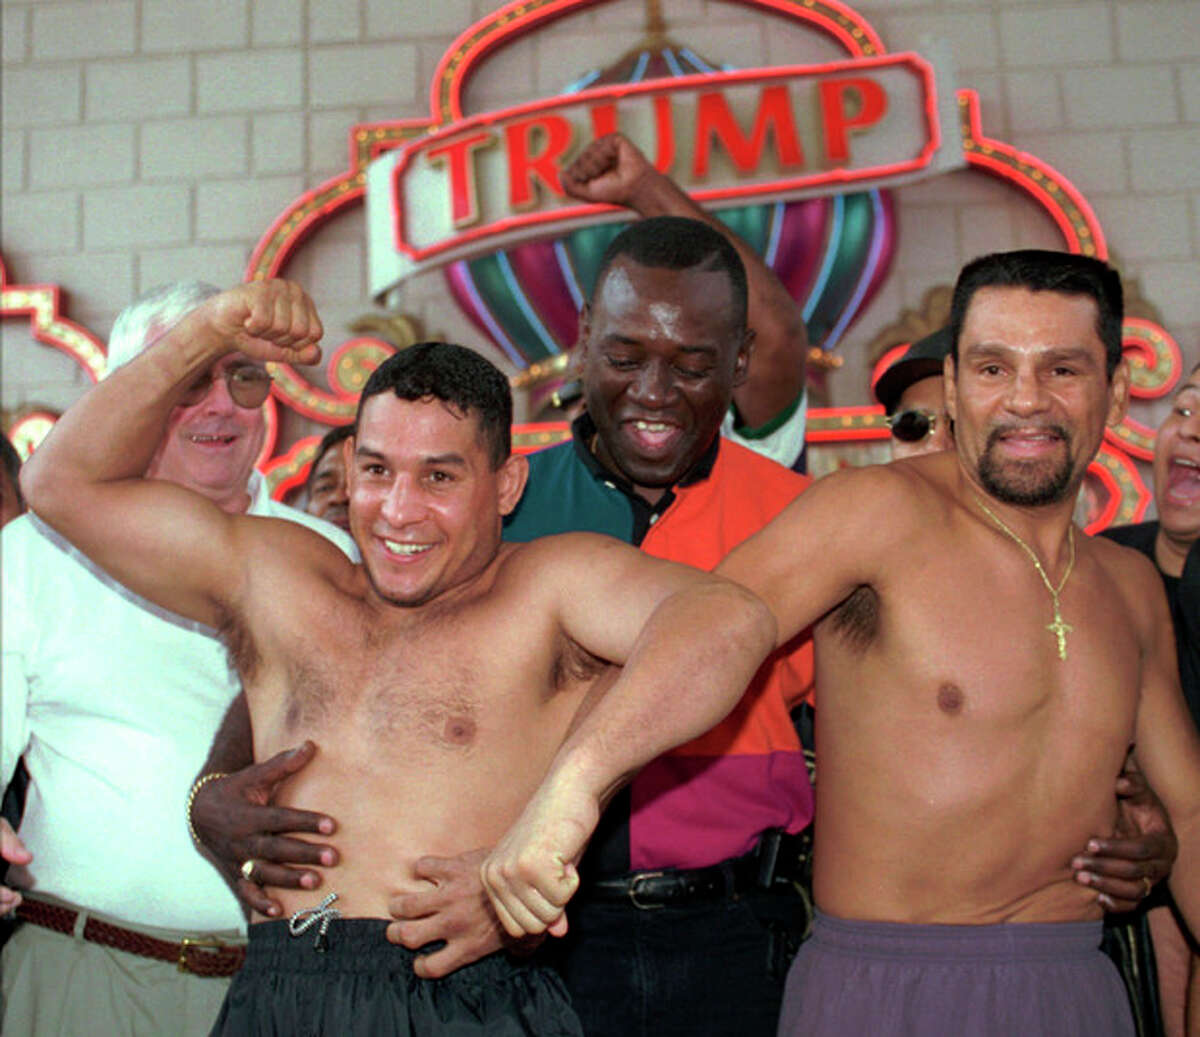 FILE - In this June 21, 1996 file photo, after a ceremonial weigh-in, Panamanian Roberto Duran, right, reaches for the stomach of boxing champ Hector "Macho" Camacho, left, who tries to elbow Duran's hand away at the Trump Taj Mahal Casino Resort in Atlantic City, N.J. Camacho, a boxer known for skill and flamboyance in the ring, as well as for a messy personal life and run-ins with the police, has died, Saturday, Nov. 24, 2012, after being taken off life support. He was 50. (AP Photo/Charles Rex Arbogast, File)